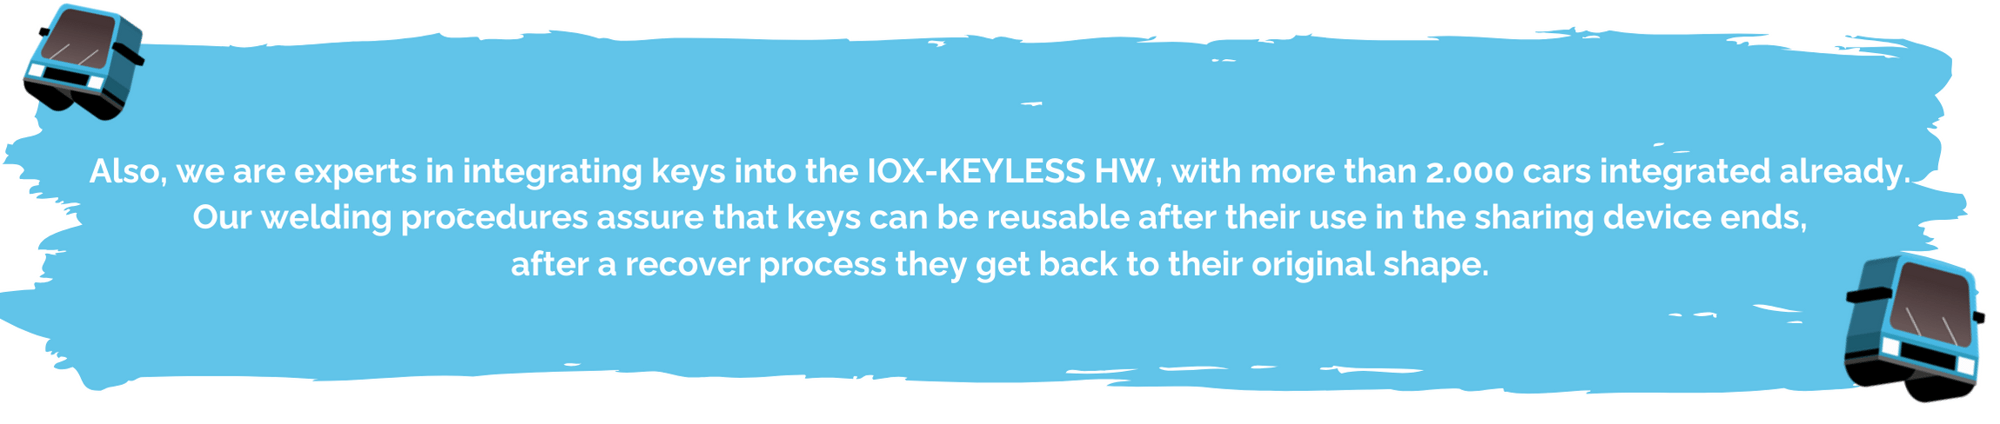 Also, we are experts in integrating keys into the IOX-KEYLESS HW, with more than 2.000 cars integrated already. Our welding procedures assure that keys can be reusable after their use in the sharing device ends, afte